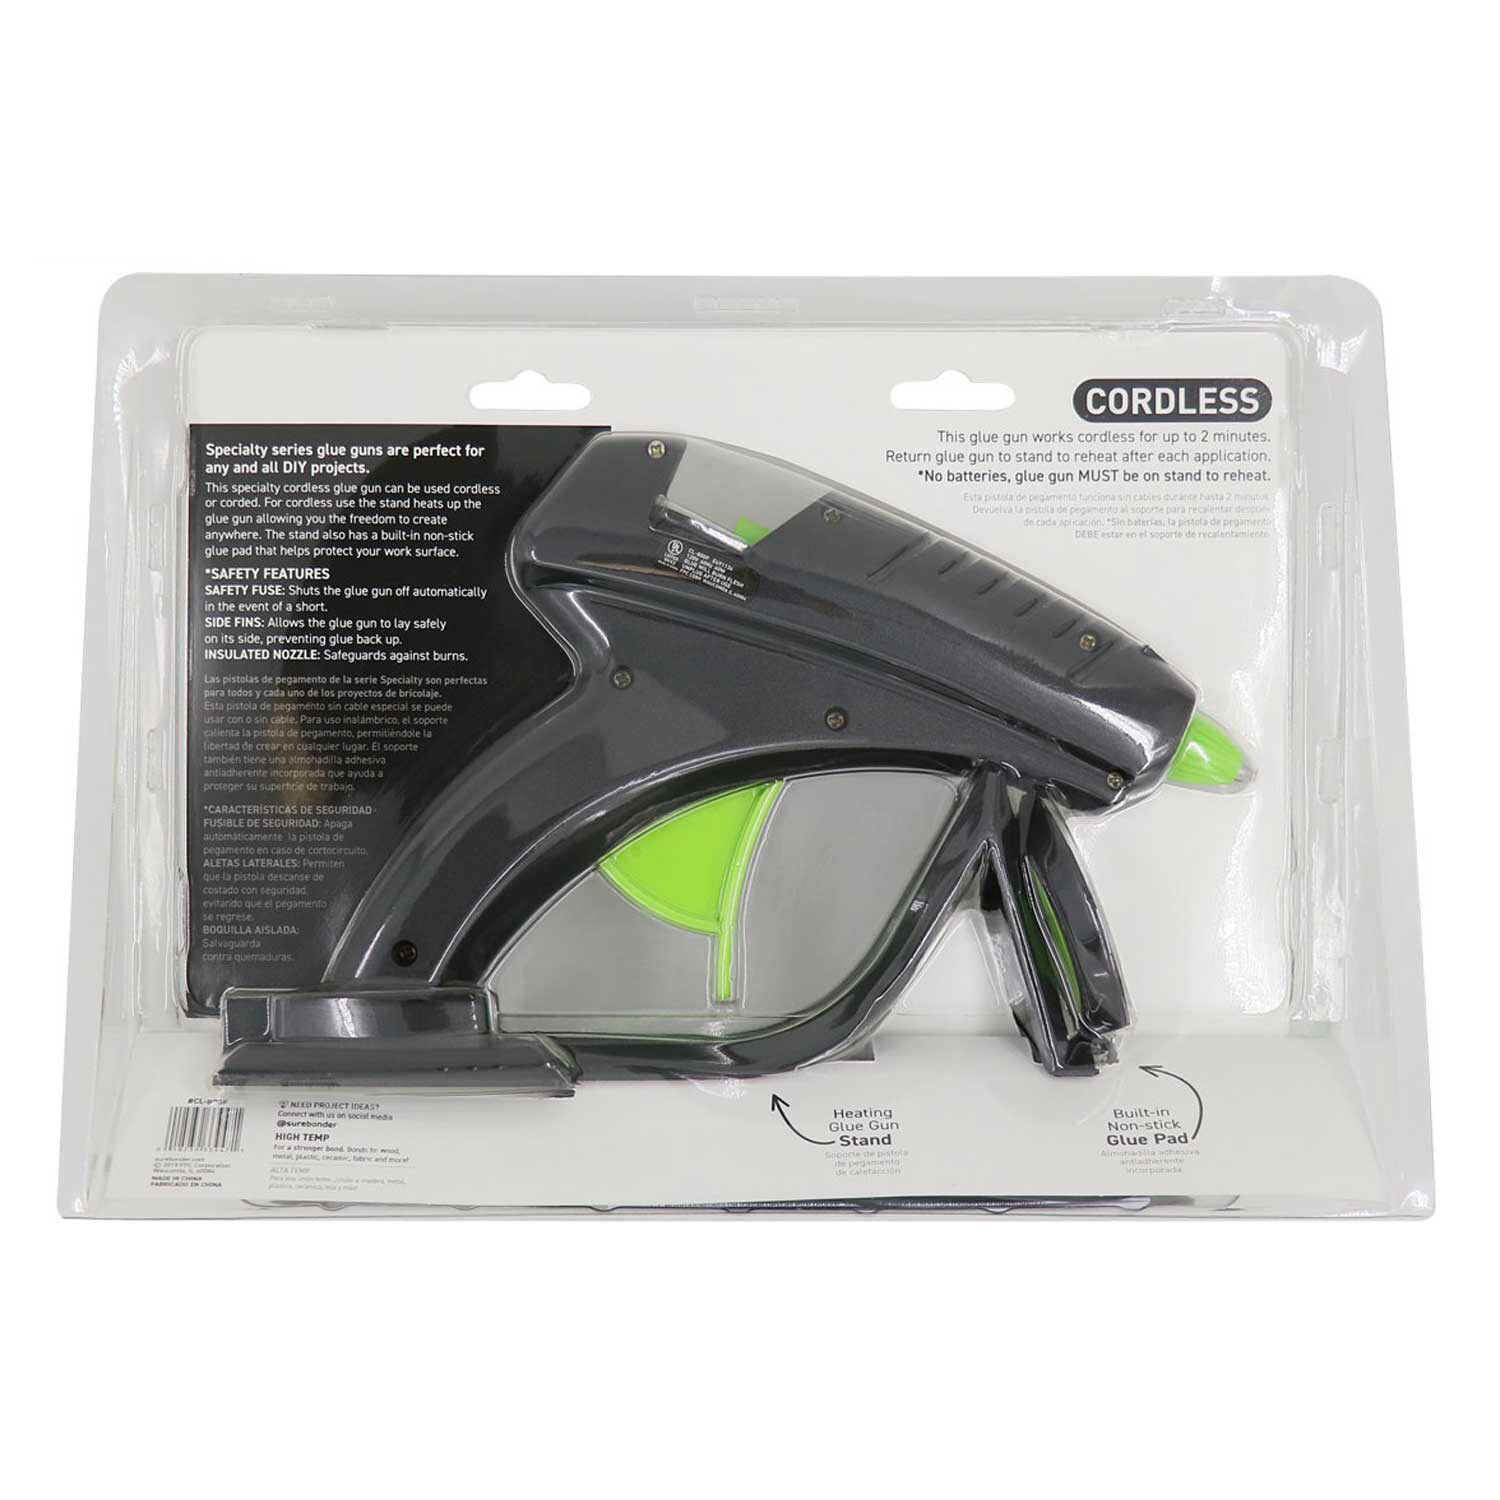 Surebonder Cordless Hot Glue Gun, High Temperature, Full Size, 60W, 50%  More Power & Other Strong Materials (Specialty Series CL-800F) & DT-50 All